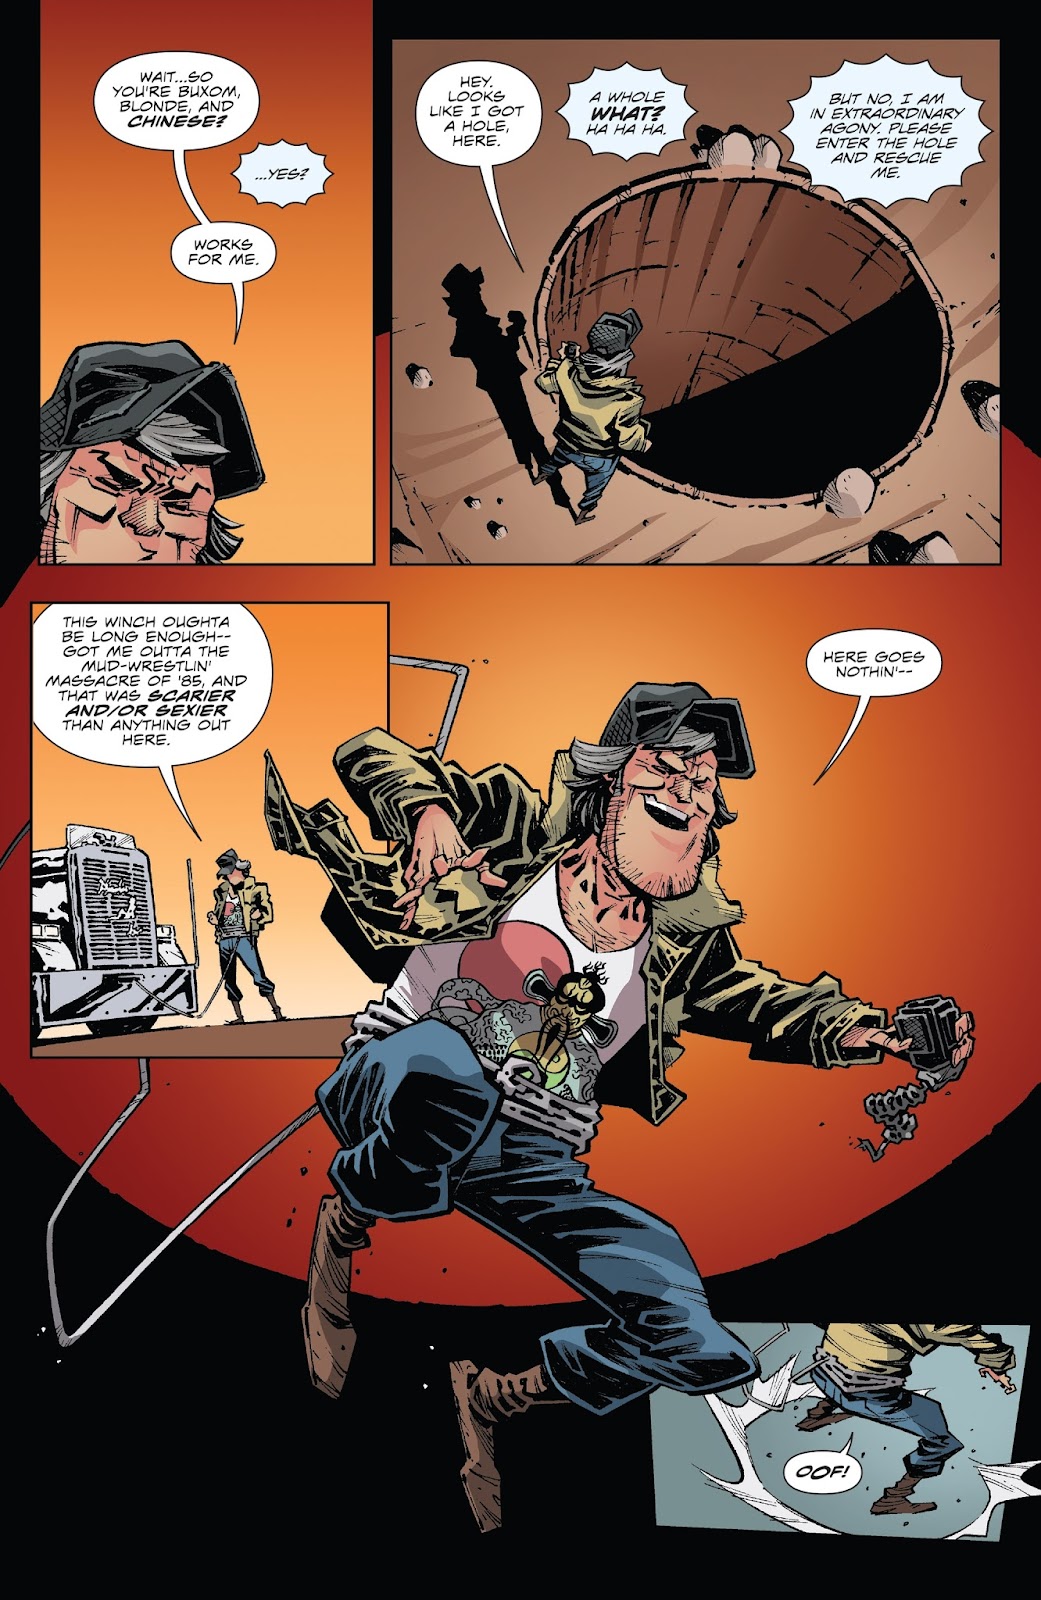 Big Trouble in Little China: Old Man Jack issue 1 - Page 16